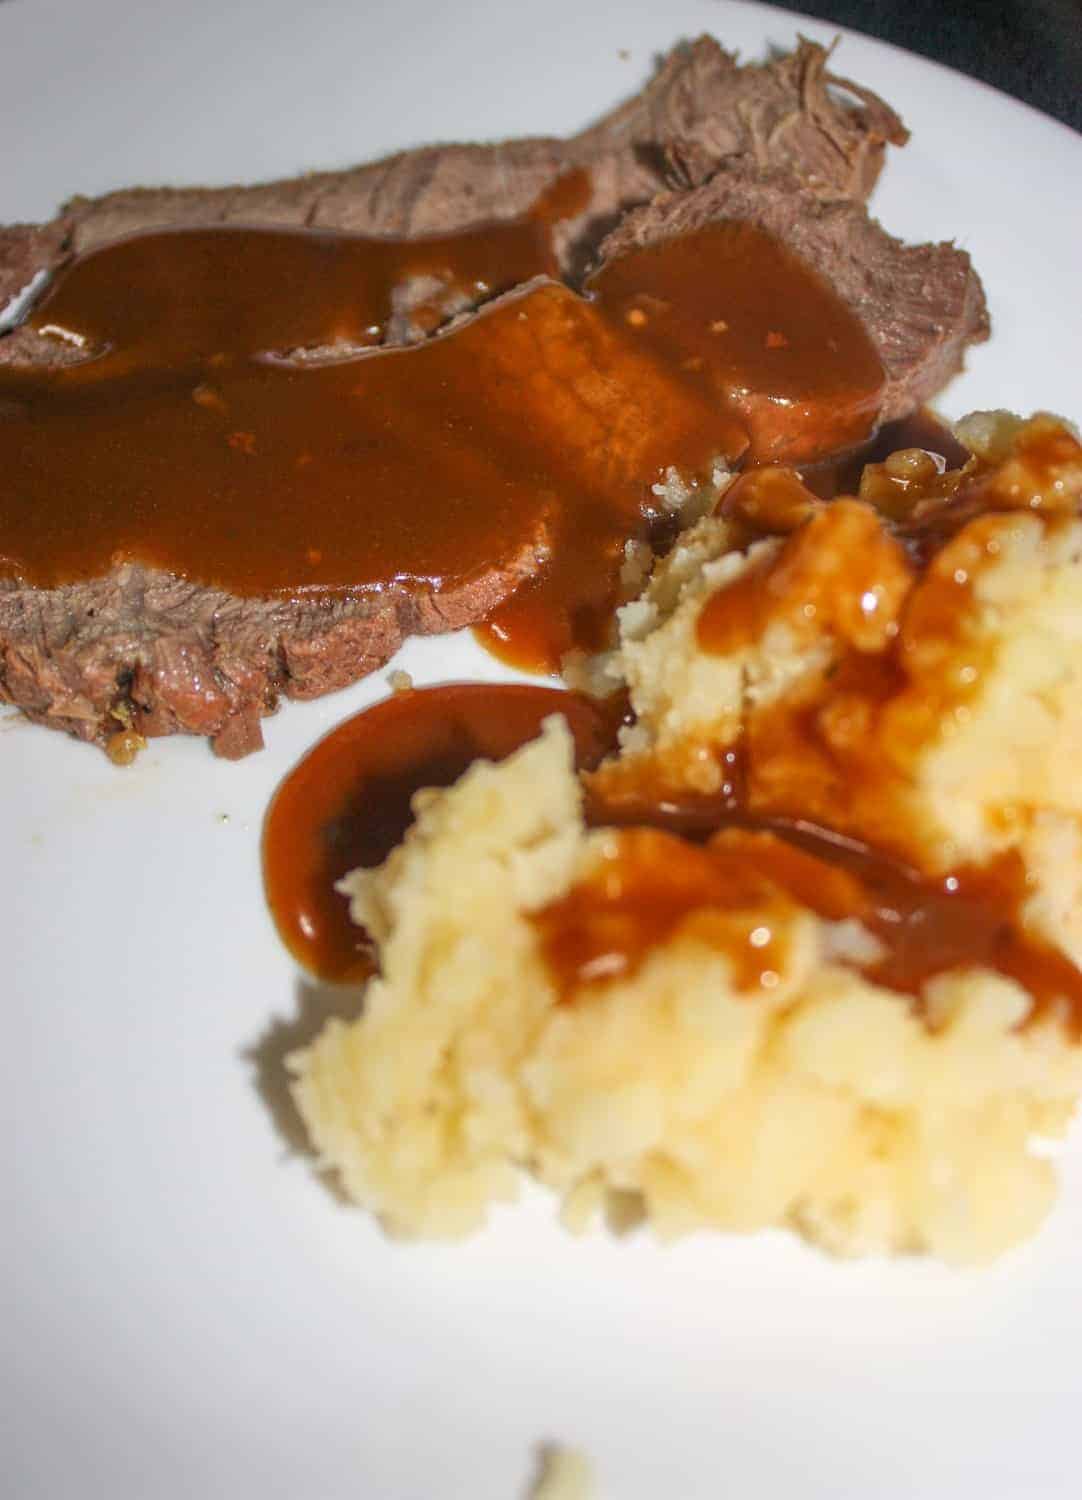 Sunday dinners can be made any day of the week when you have an Instant Pot.  Try out this Instant Pot Sirloin Roast with Mashed Potatoes and people will think you have been cooking for hours!